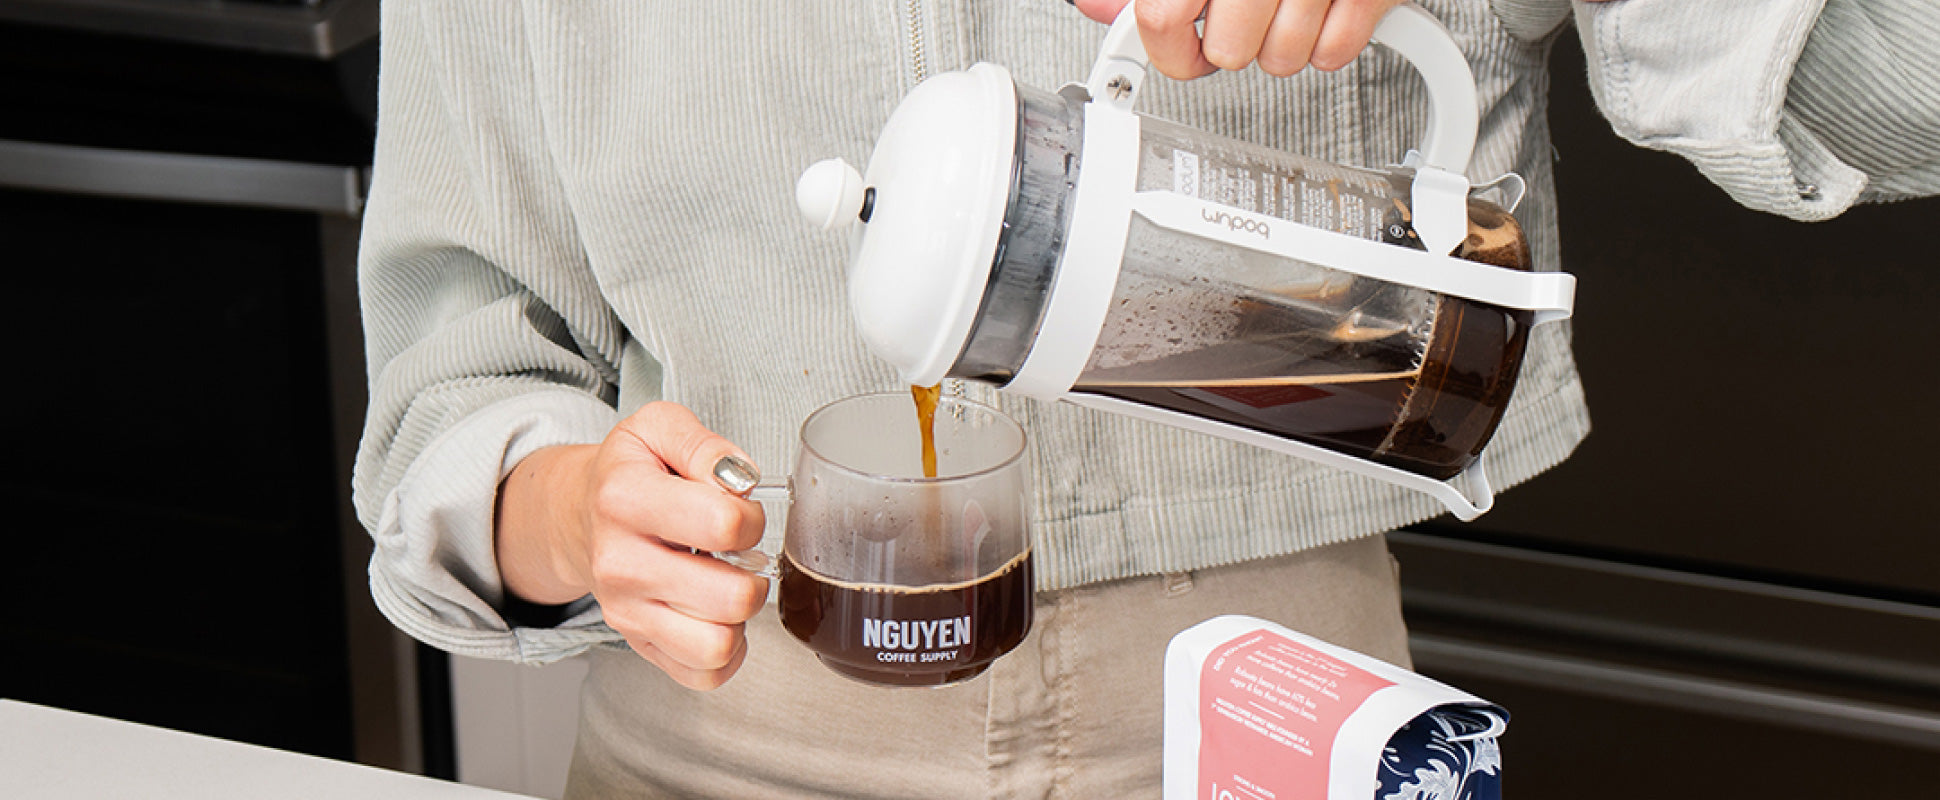 How to Make Coffee in a French Press: A Stronger Brew Guide